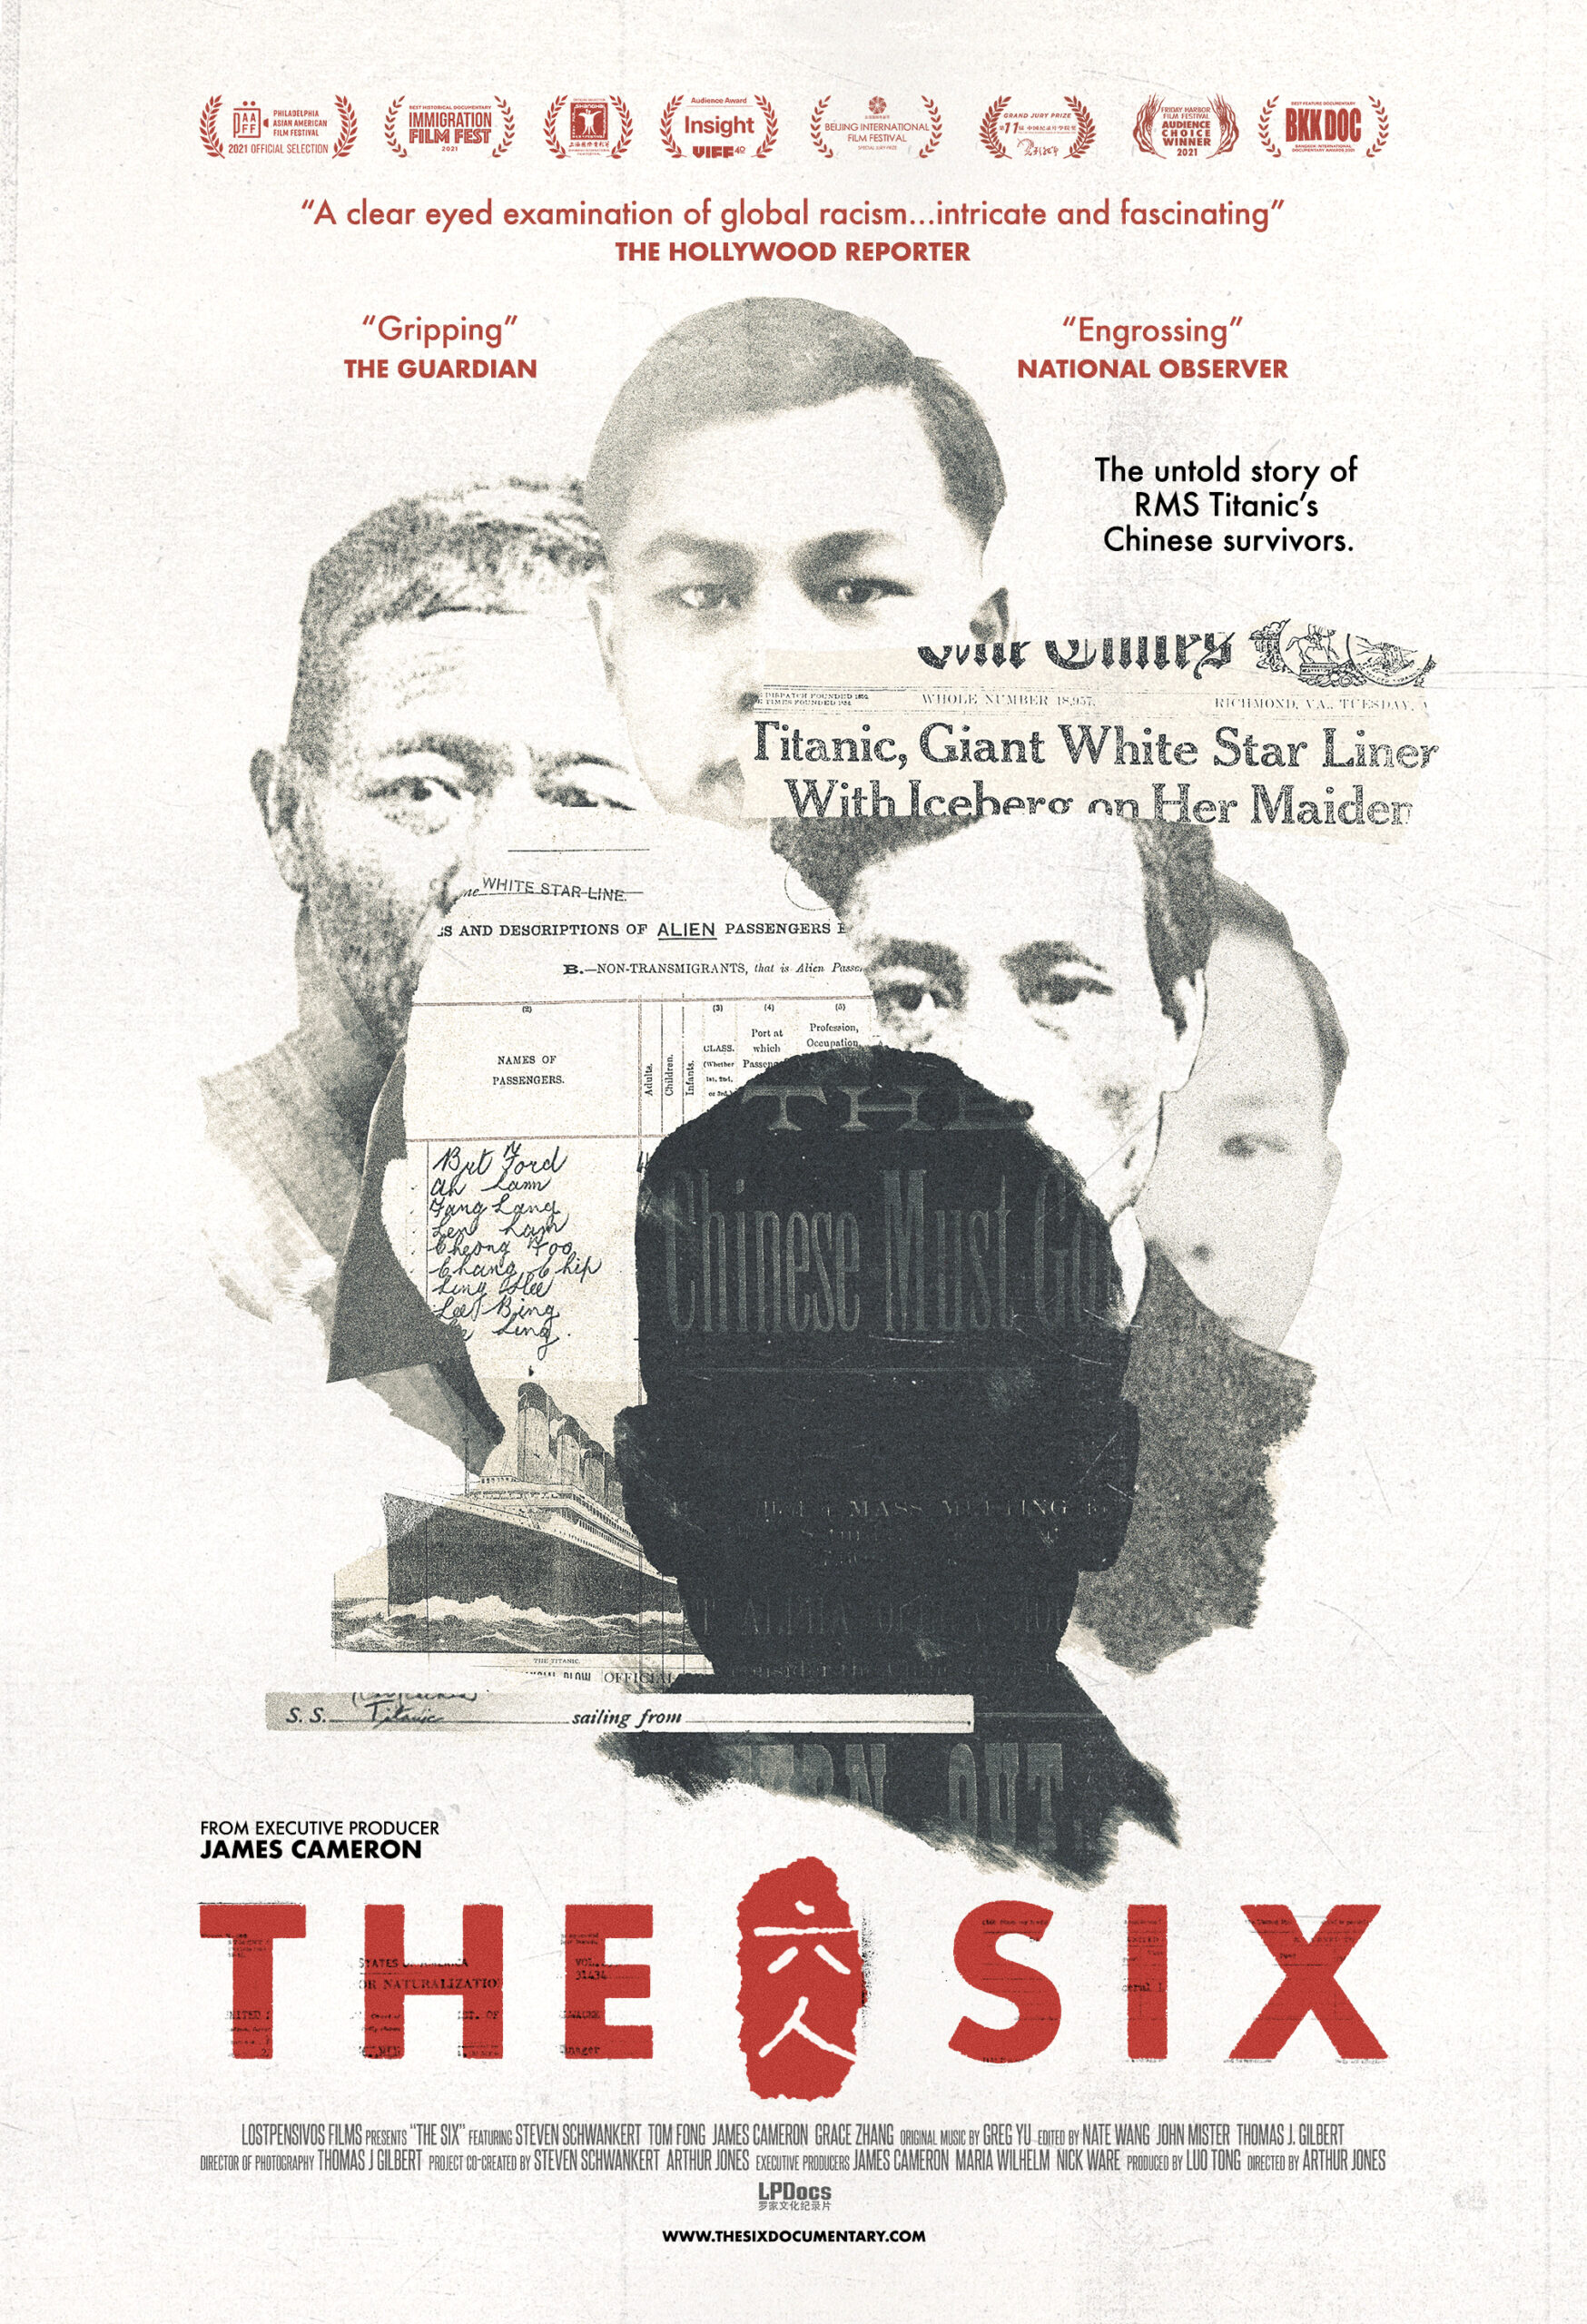 The movie poster for The Six